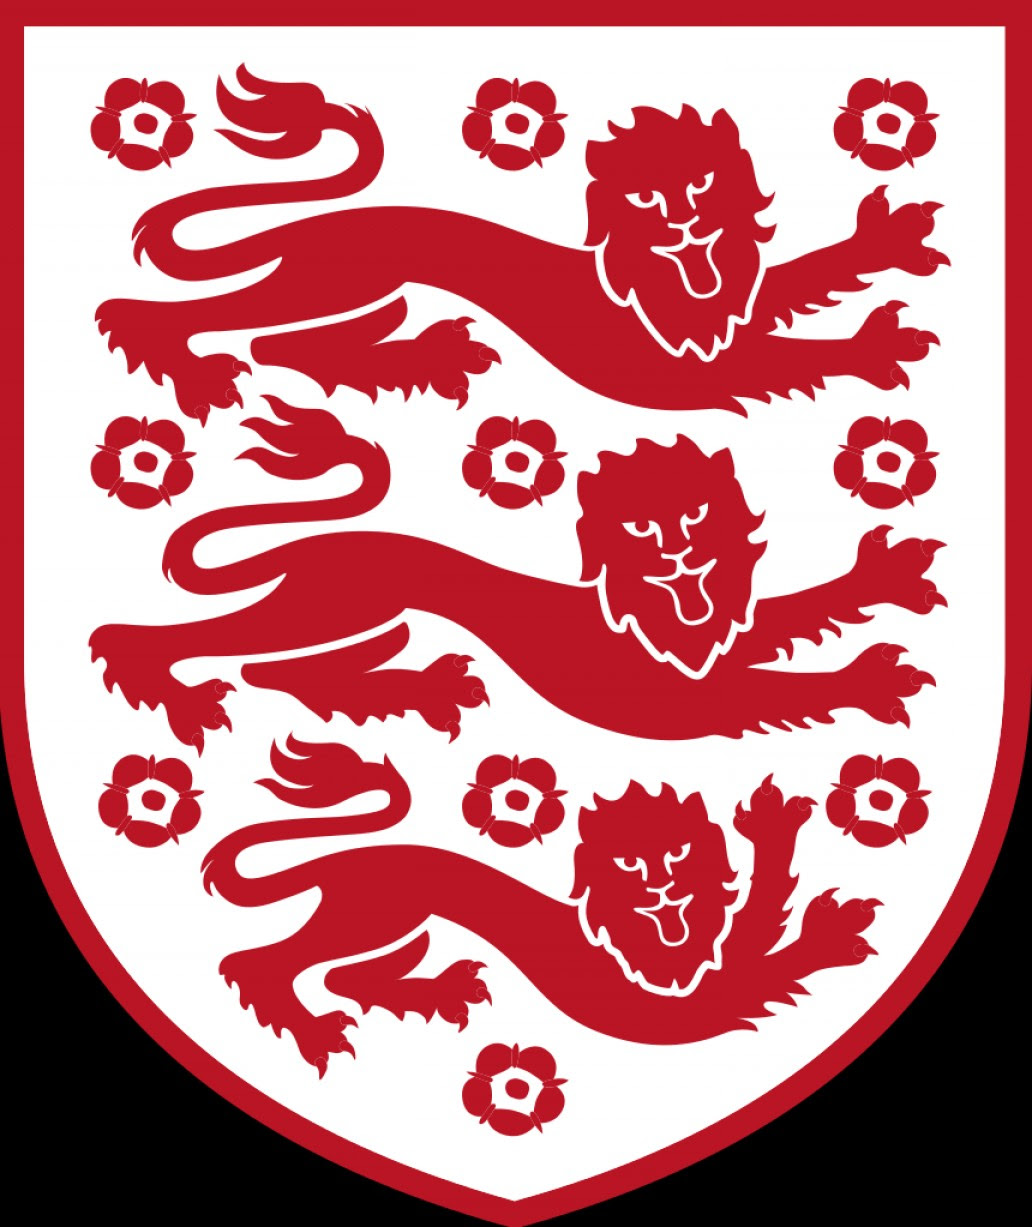 Premier league logo transparent png is about swansea city afc, england, swansea, football, logo, team, west ham united fc, sports league download now for free this premier league logo transparent png image with no background. England Football Logo Png